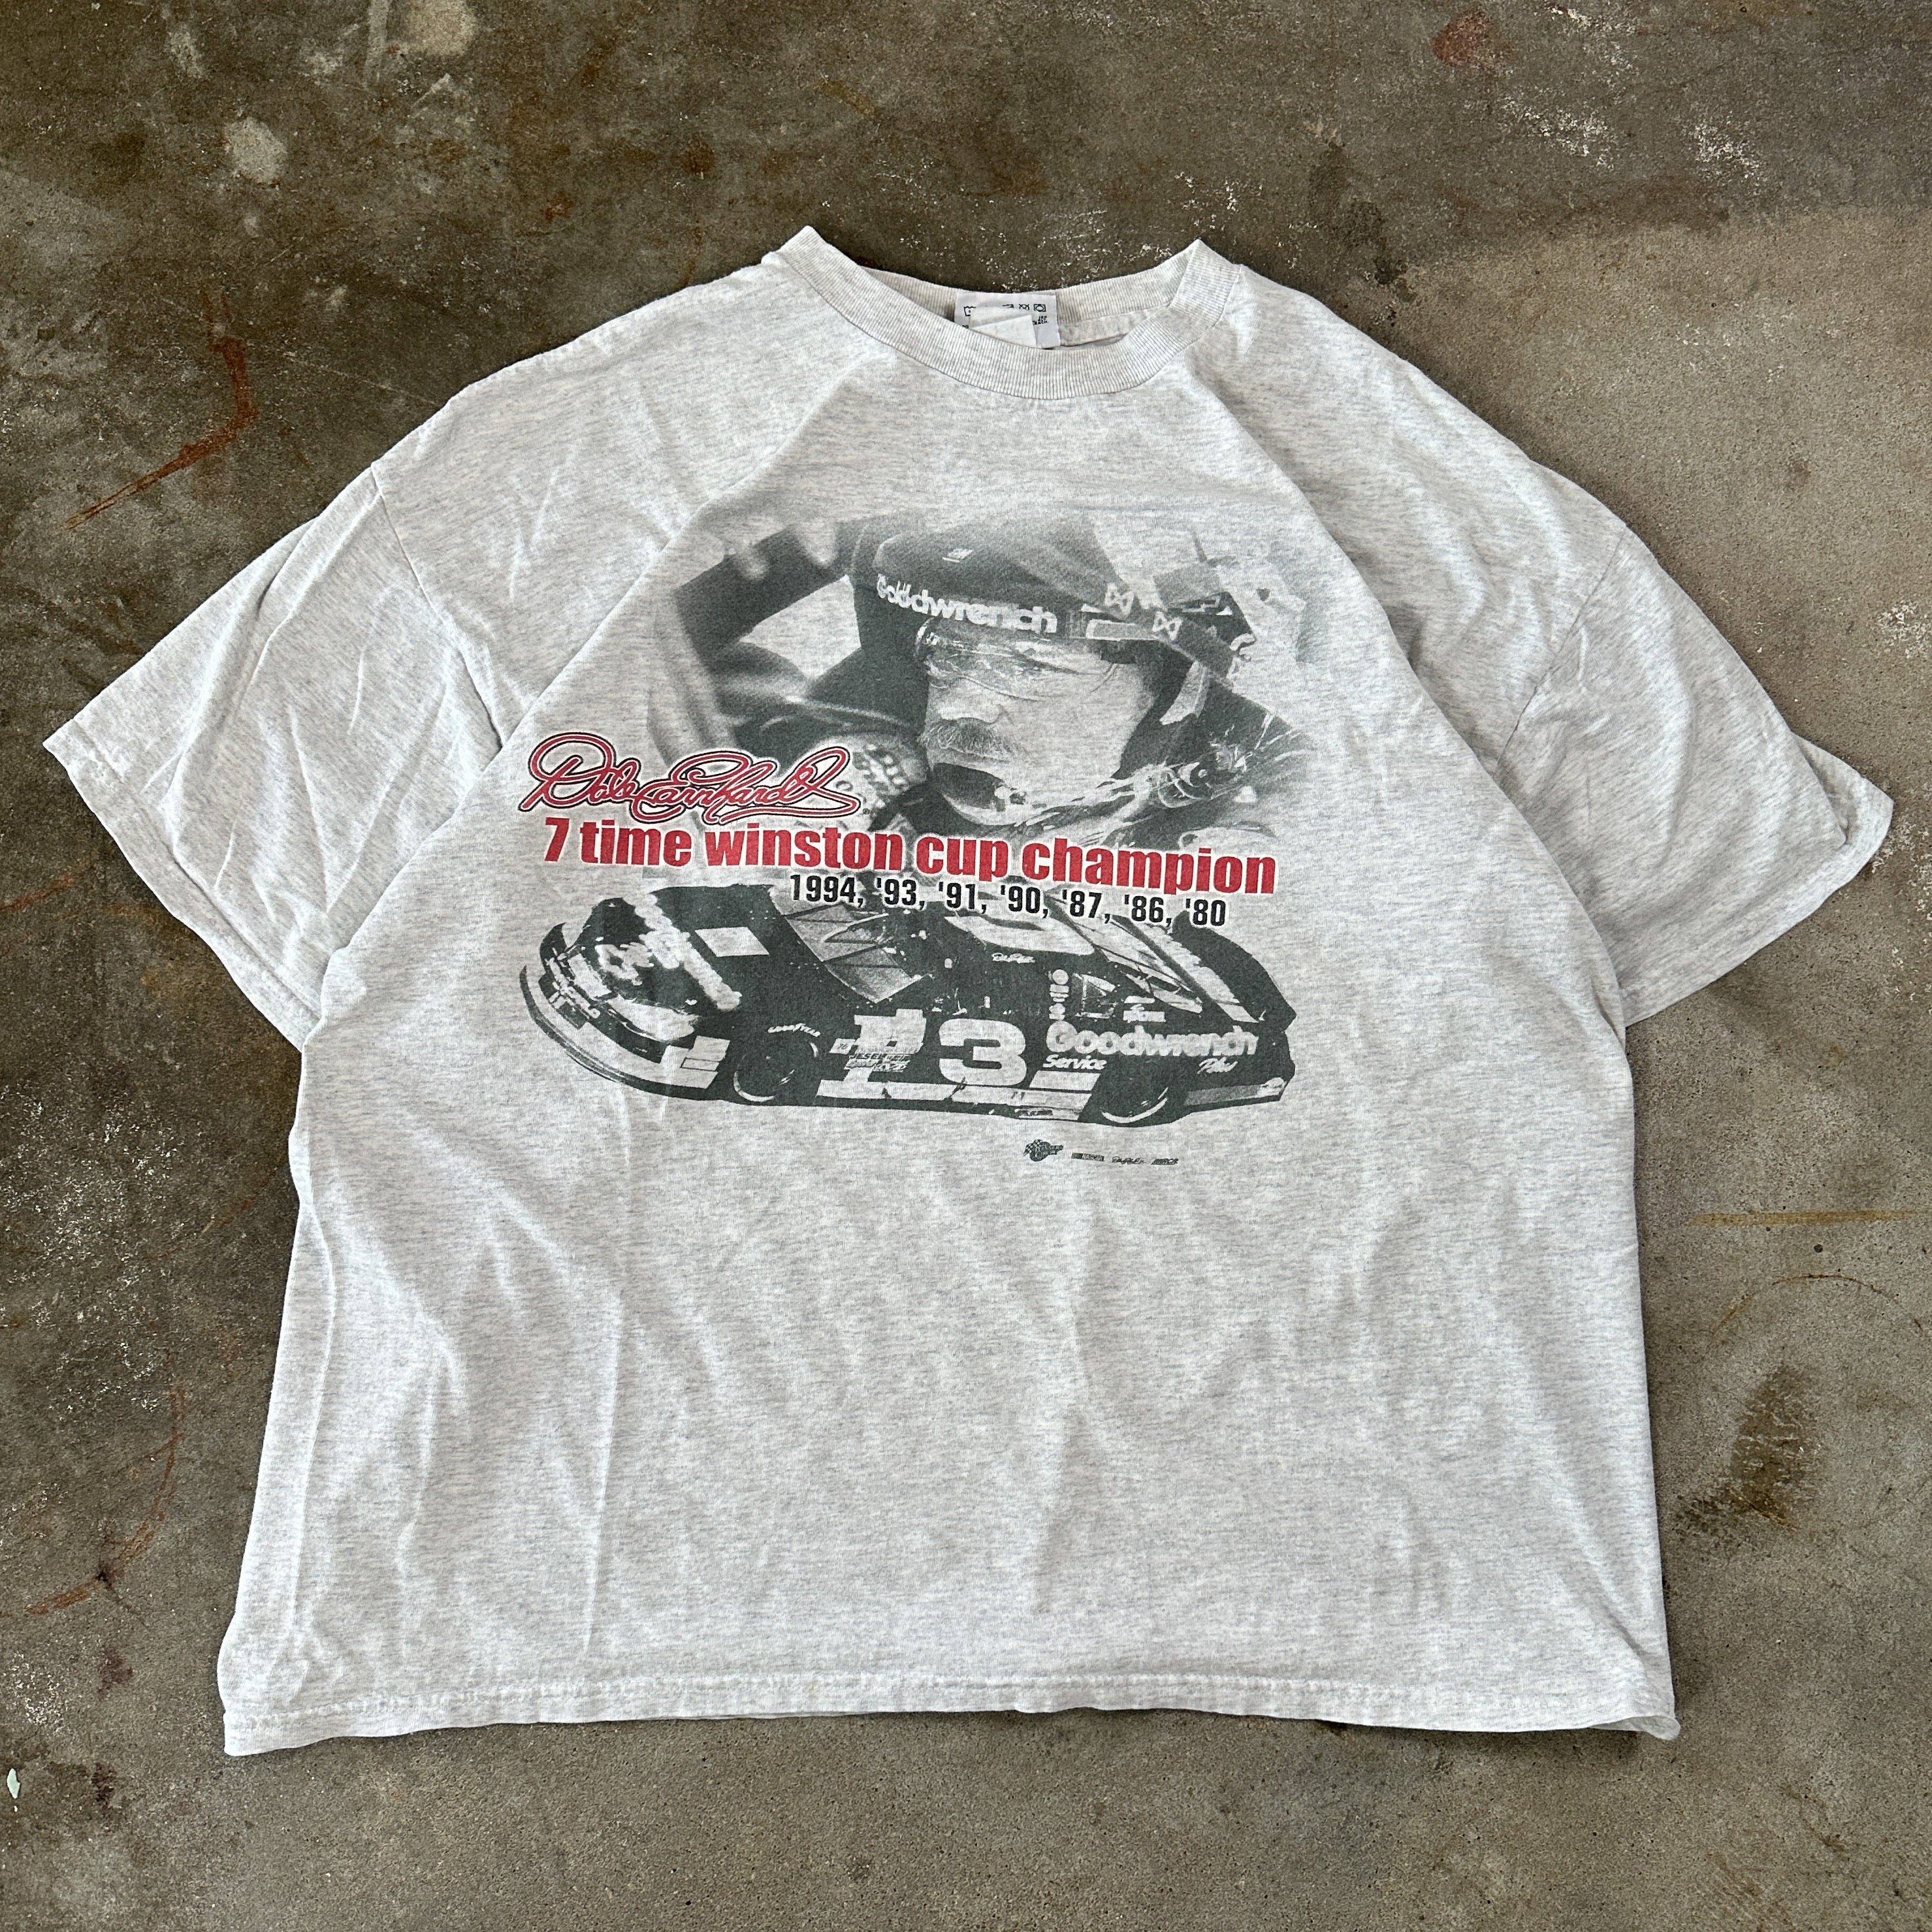 Dale Earnhardt 7 Time Winston Cup Champ 1994 T-Shirt (XXL)